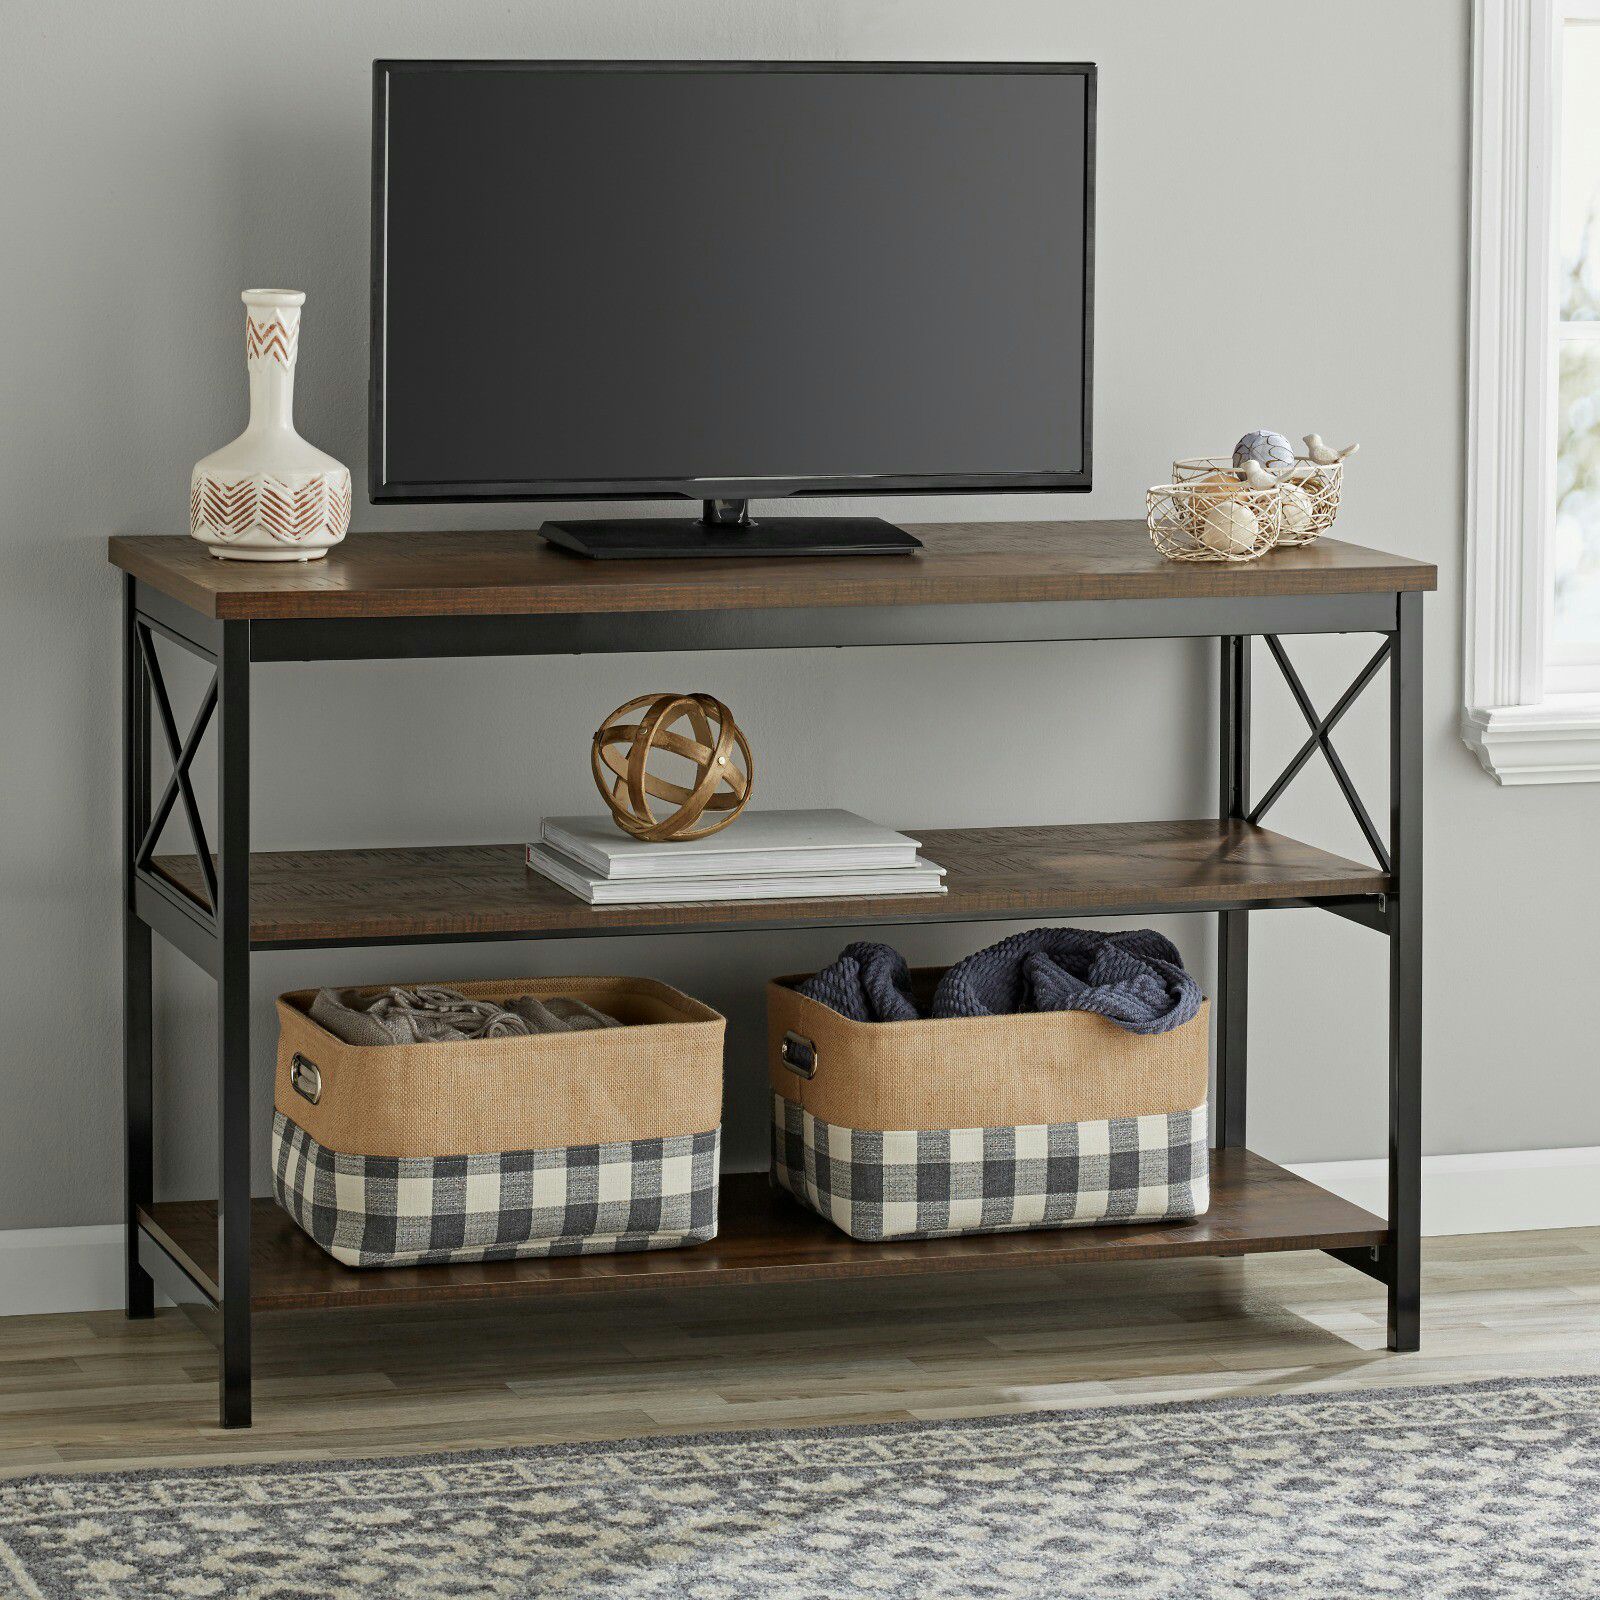 Mainstays 3-Shelf TV Console Table for Most TVs up to 42", Sawcut Brown